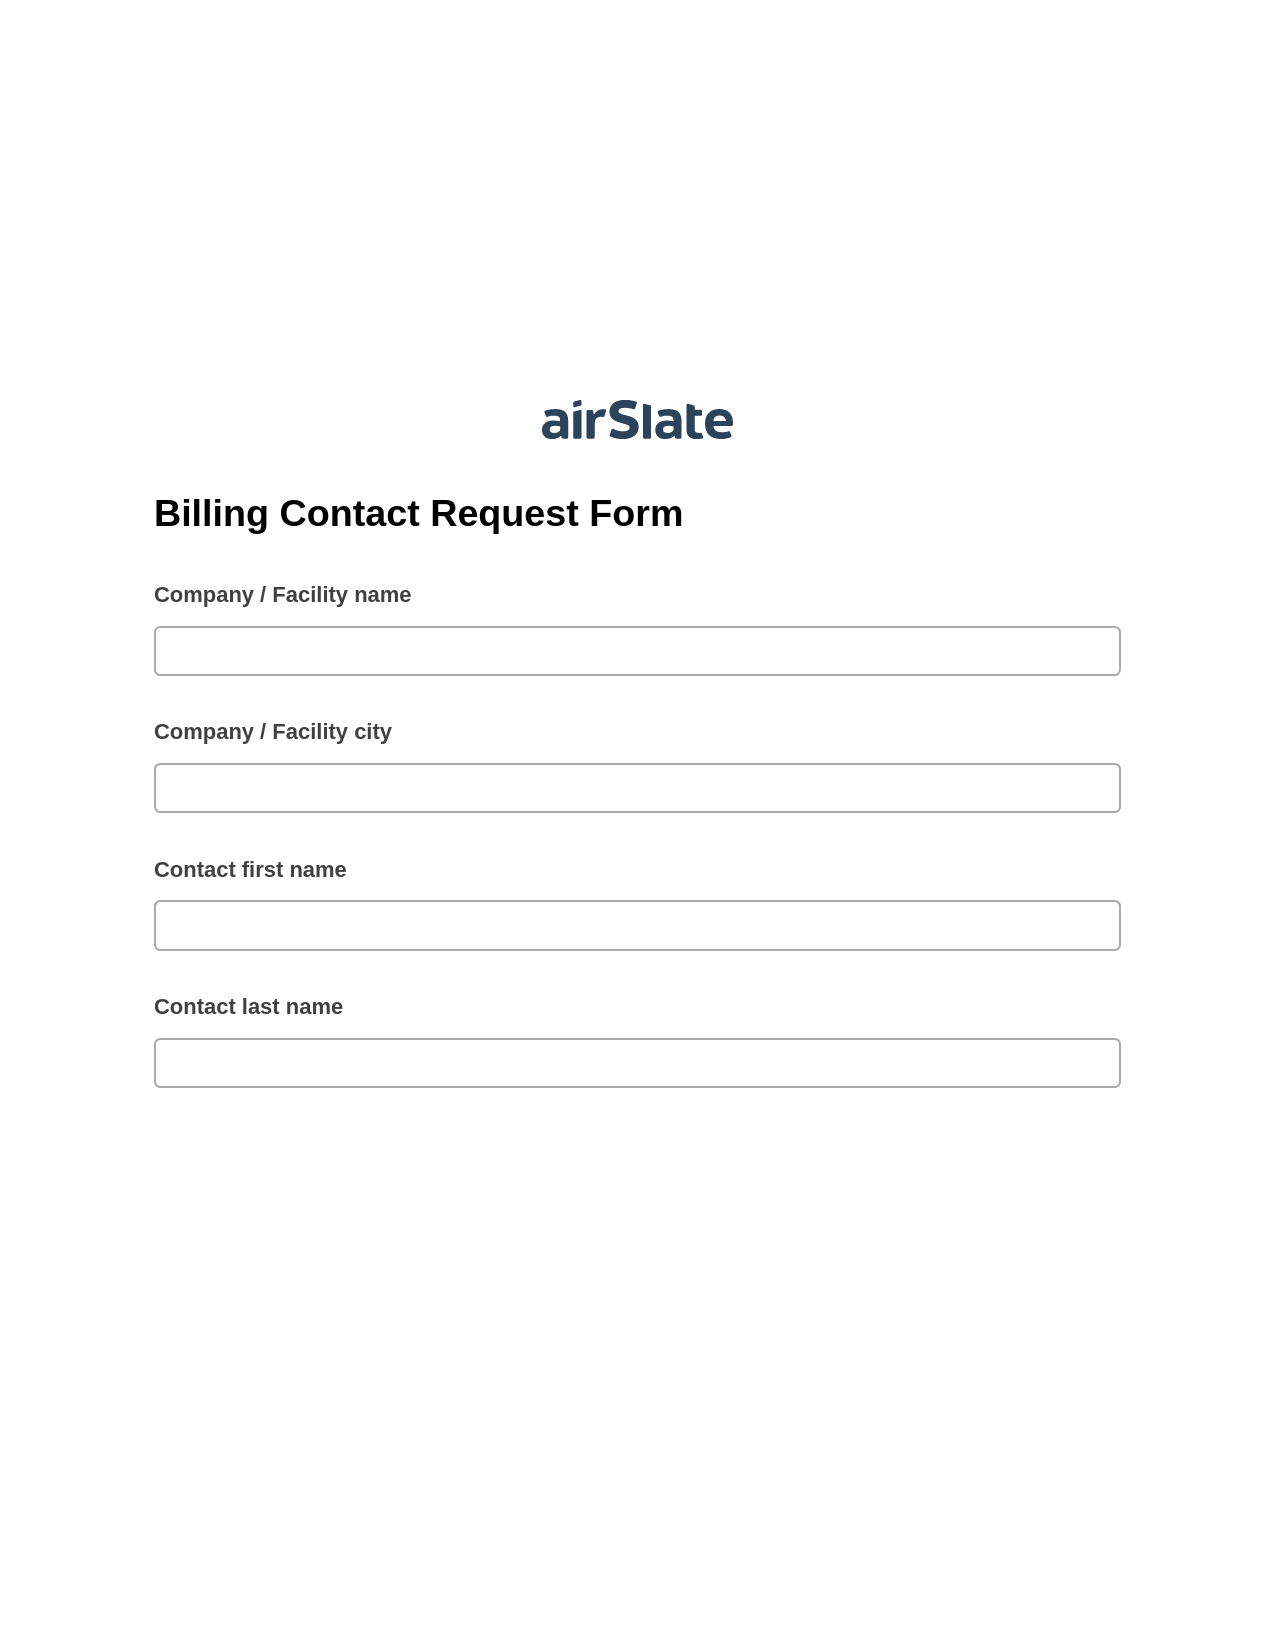 Multirole Billing Contact Request Form Pre-fill Slate from MS Dynamics 365 Records Bot, Update MS Dynamics 365 Records Bot, Dropbox Bot